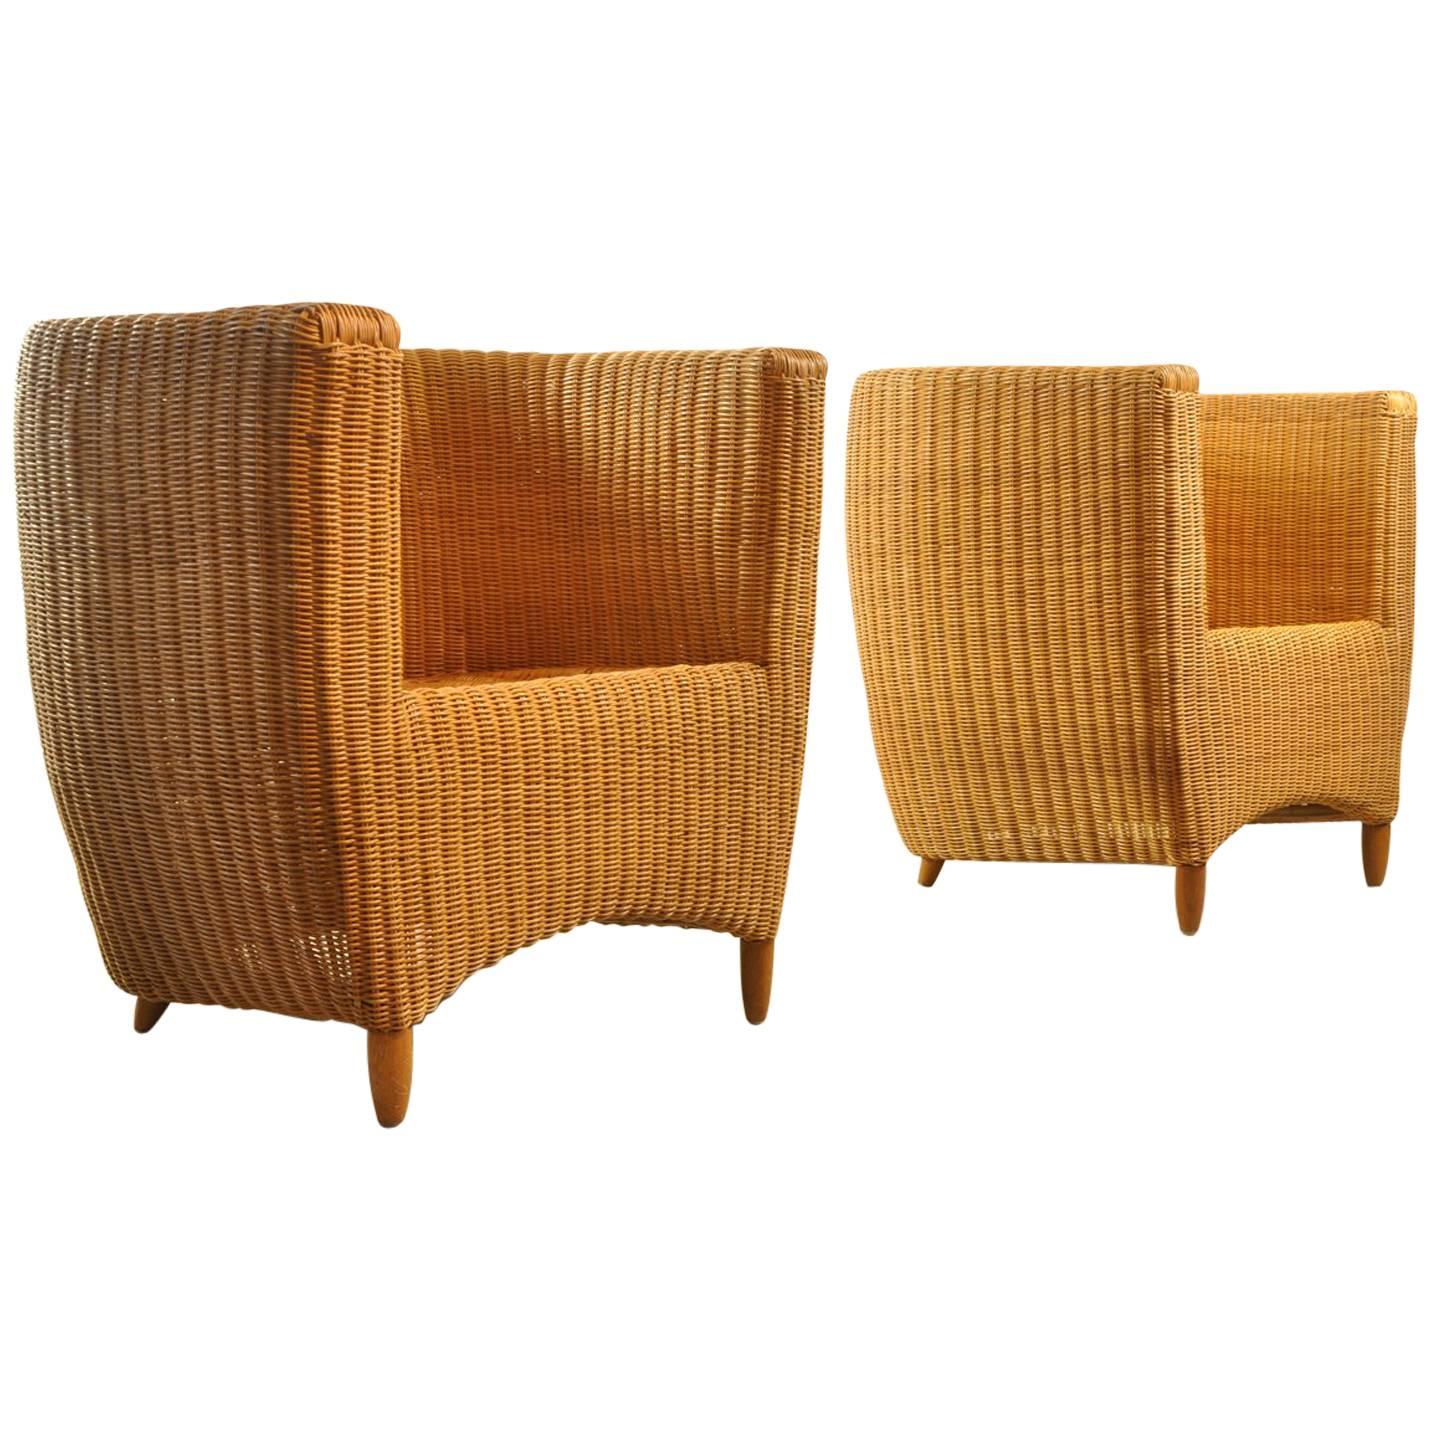 Pair of 1970s Rattan Chairs